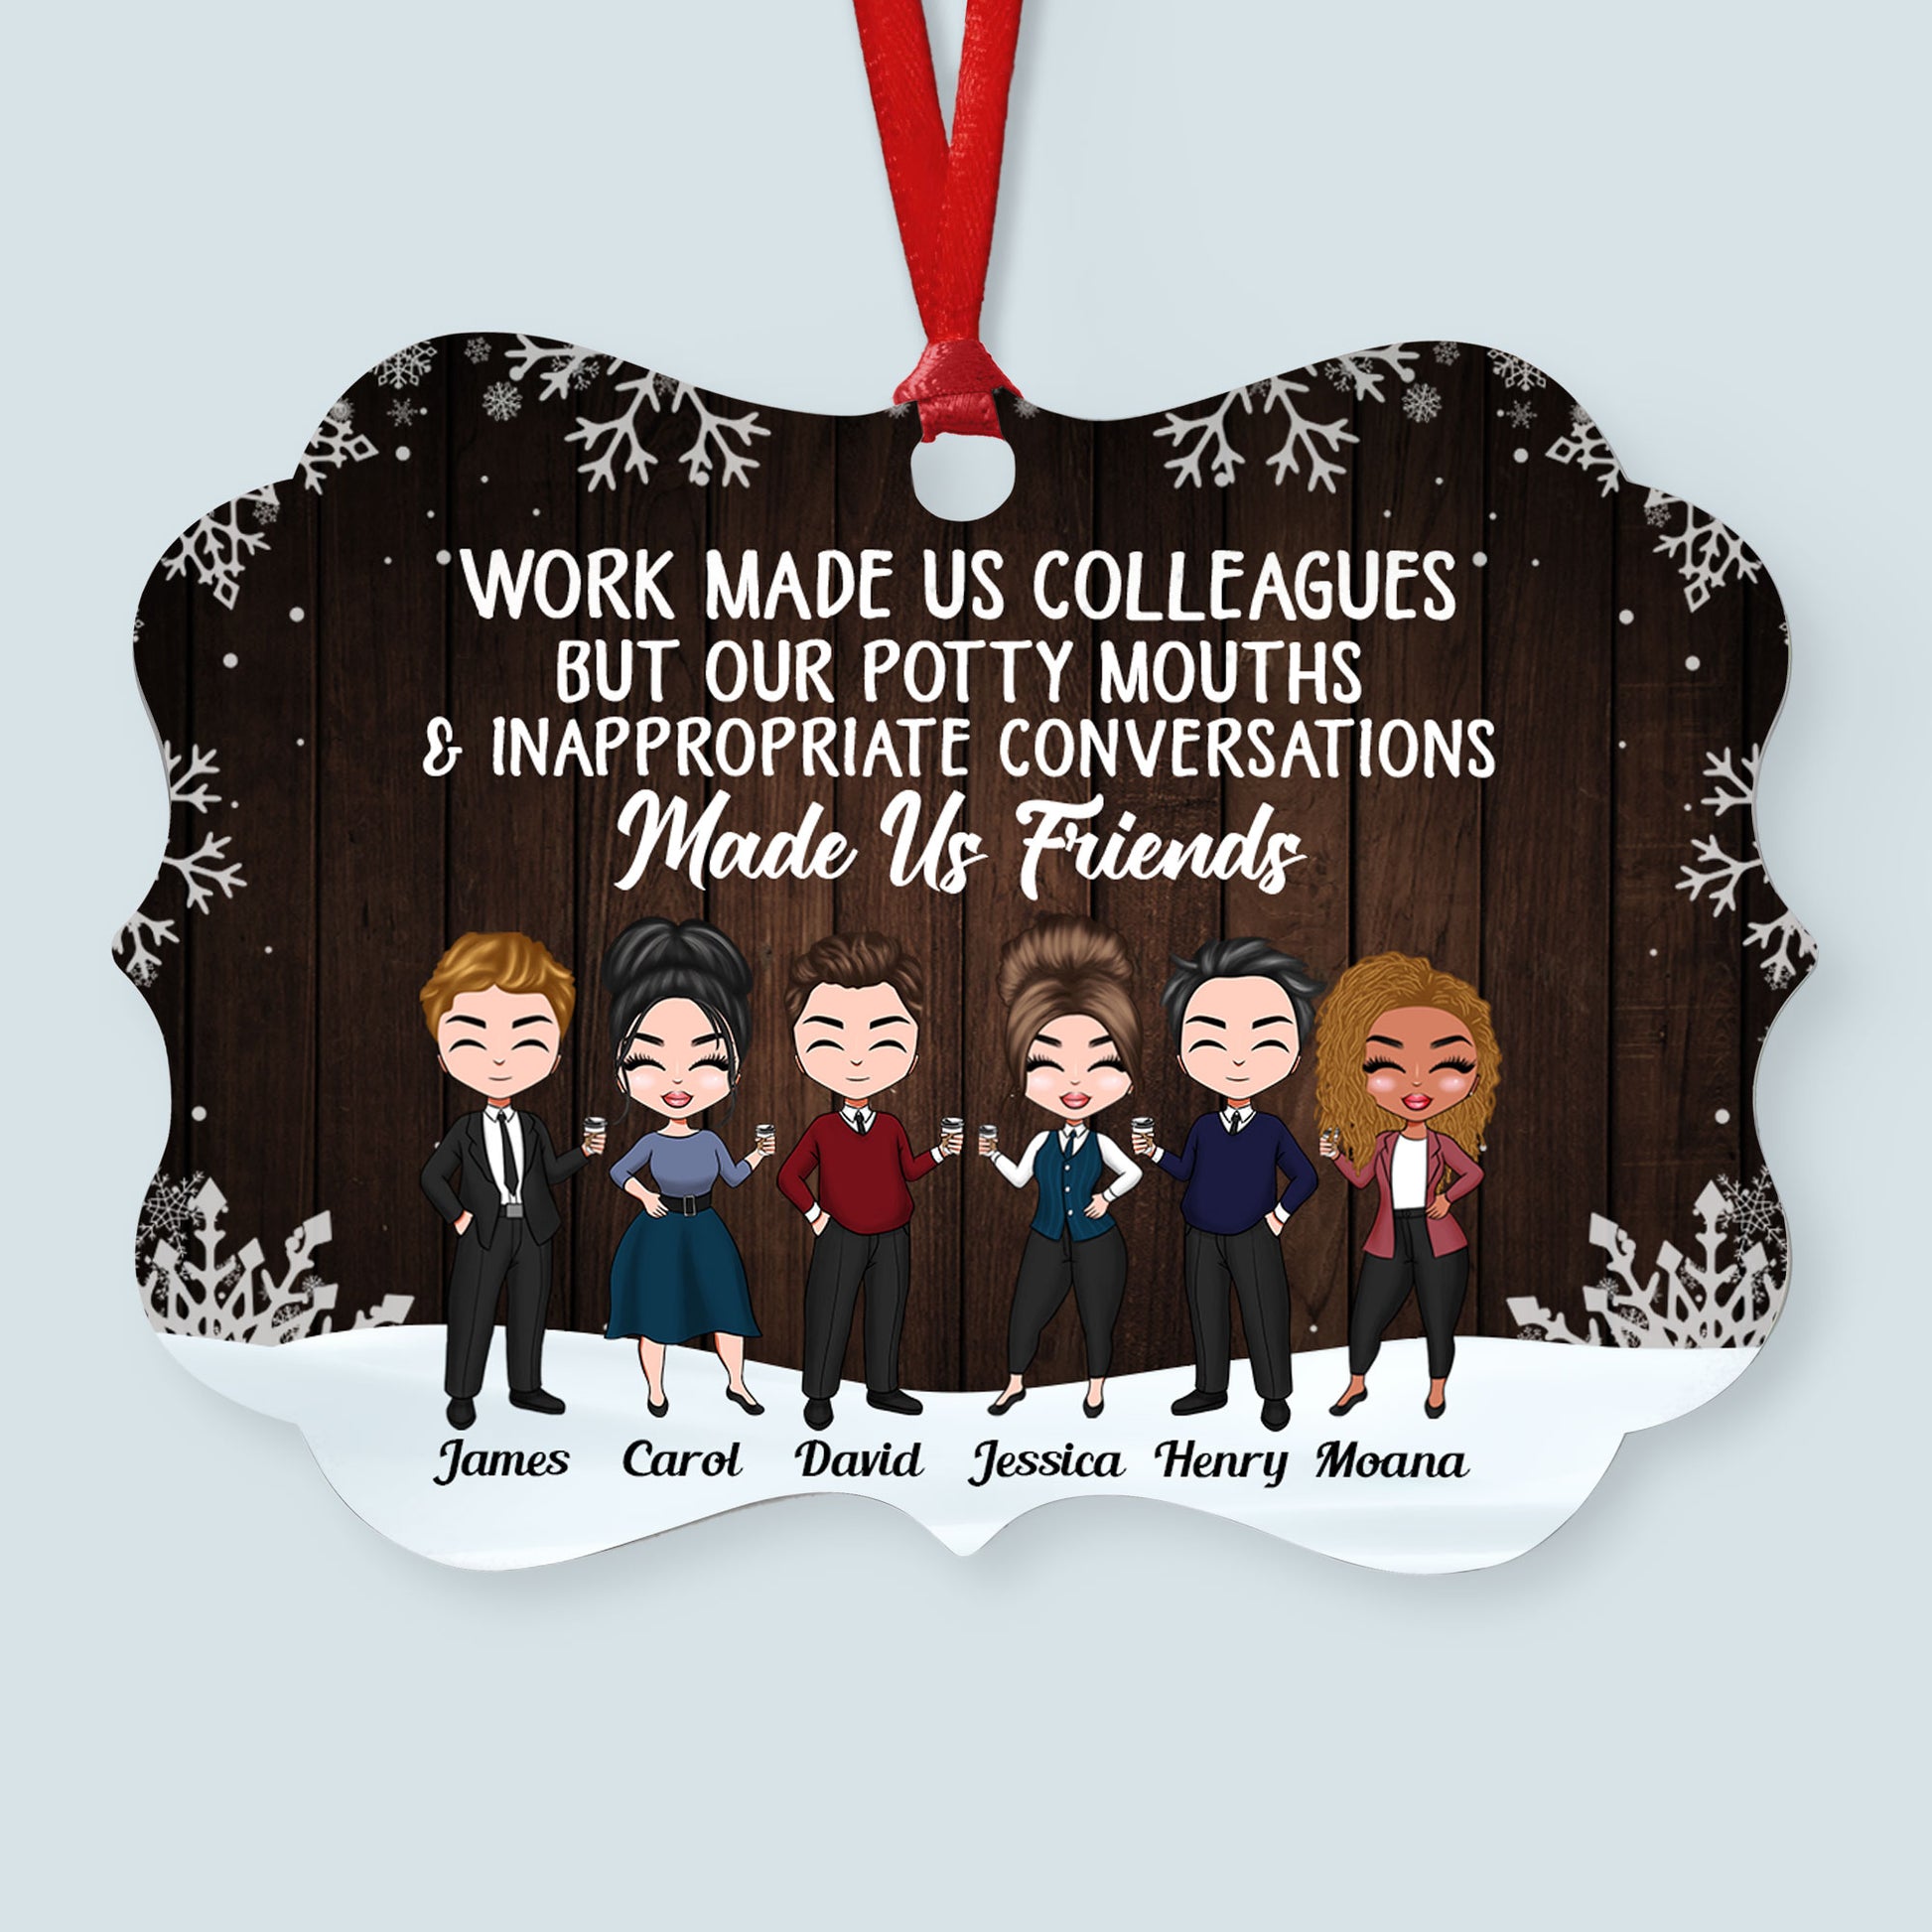 Our Potty Mouths Made Us Friends - Personalized Aluminum Ornament - Christmas Gift For Colleagues